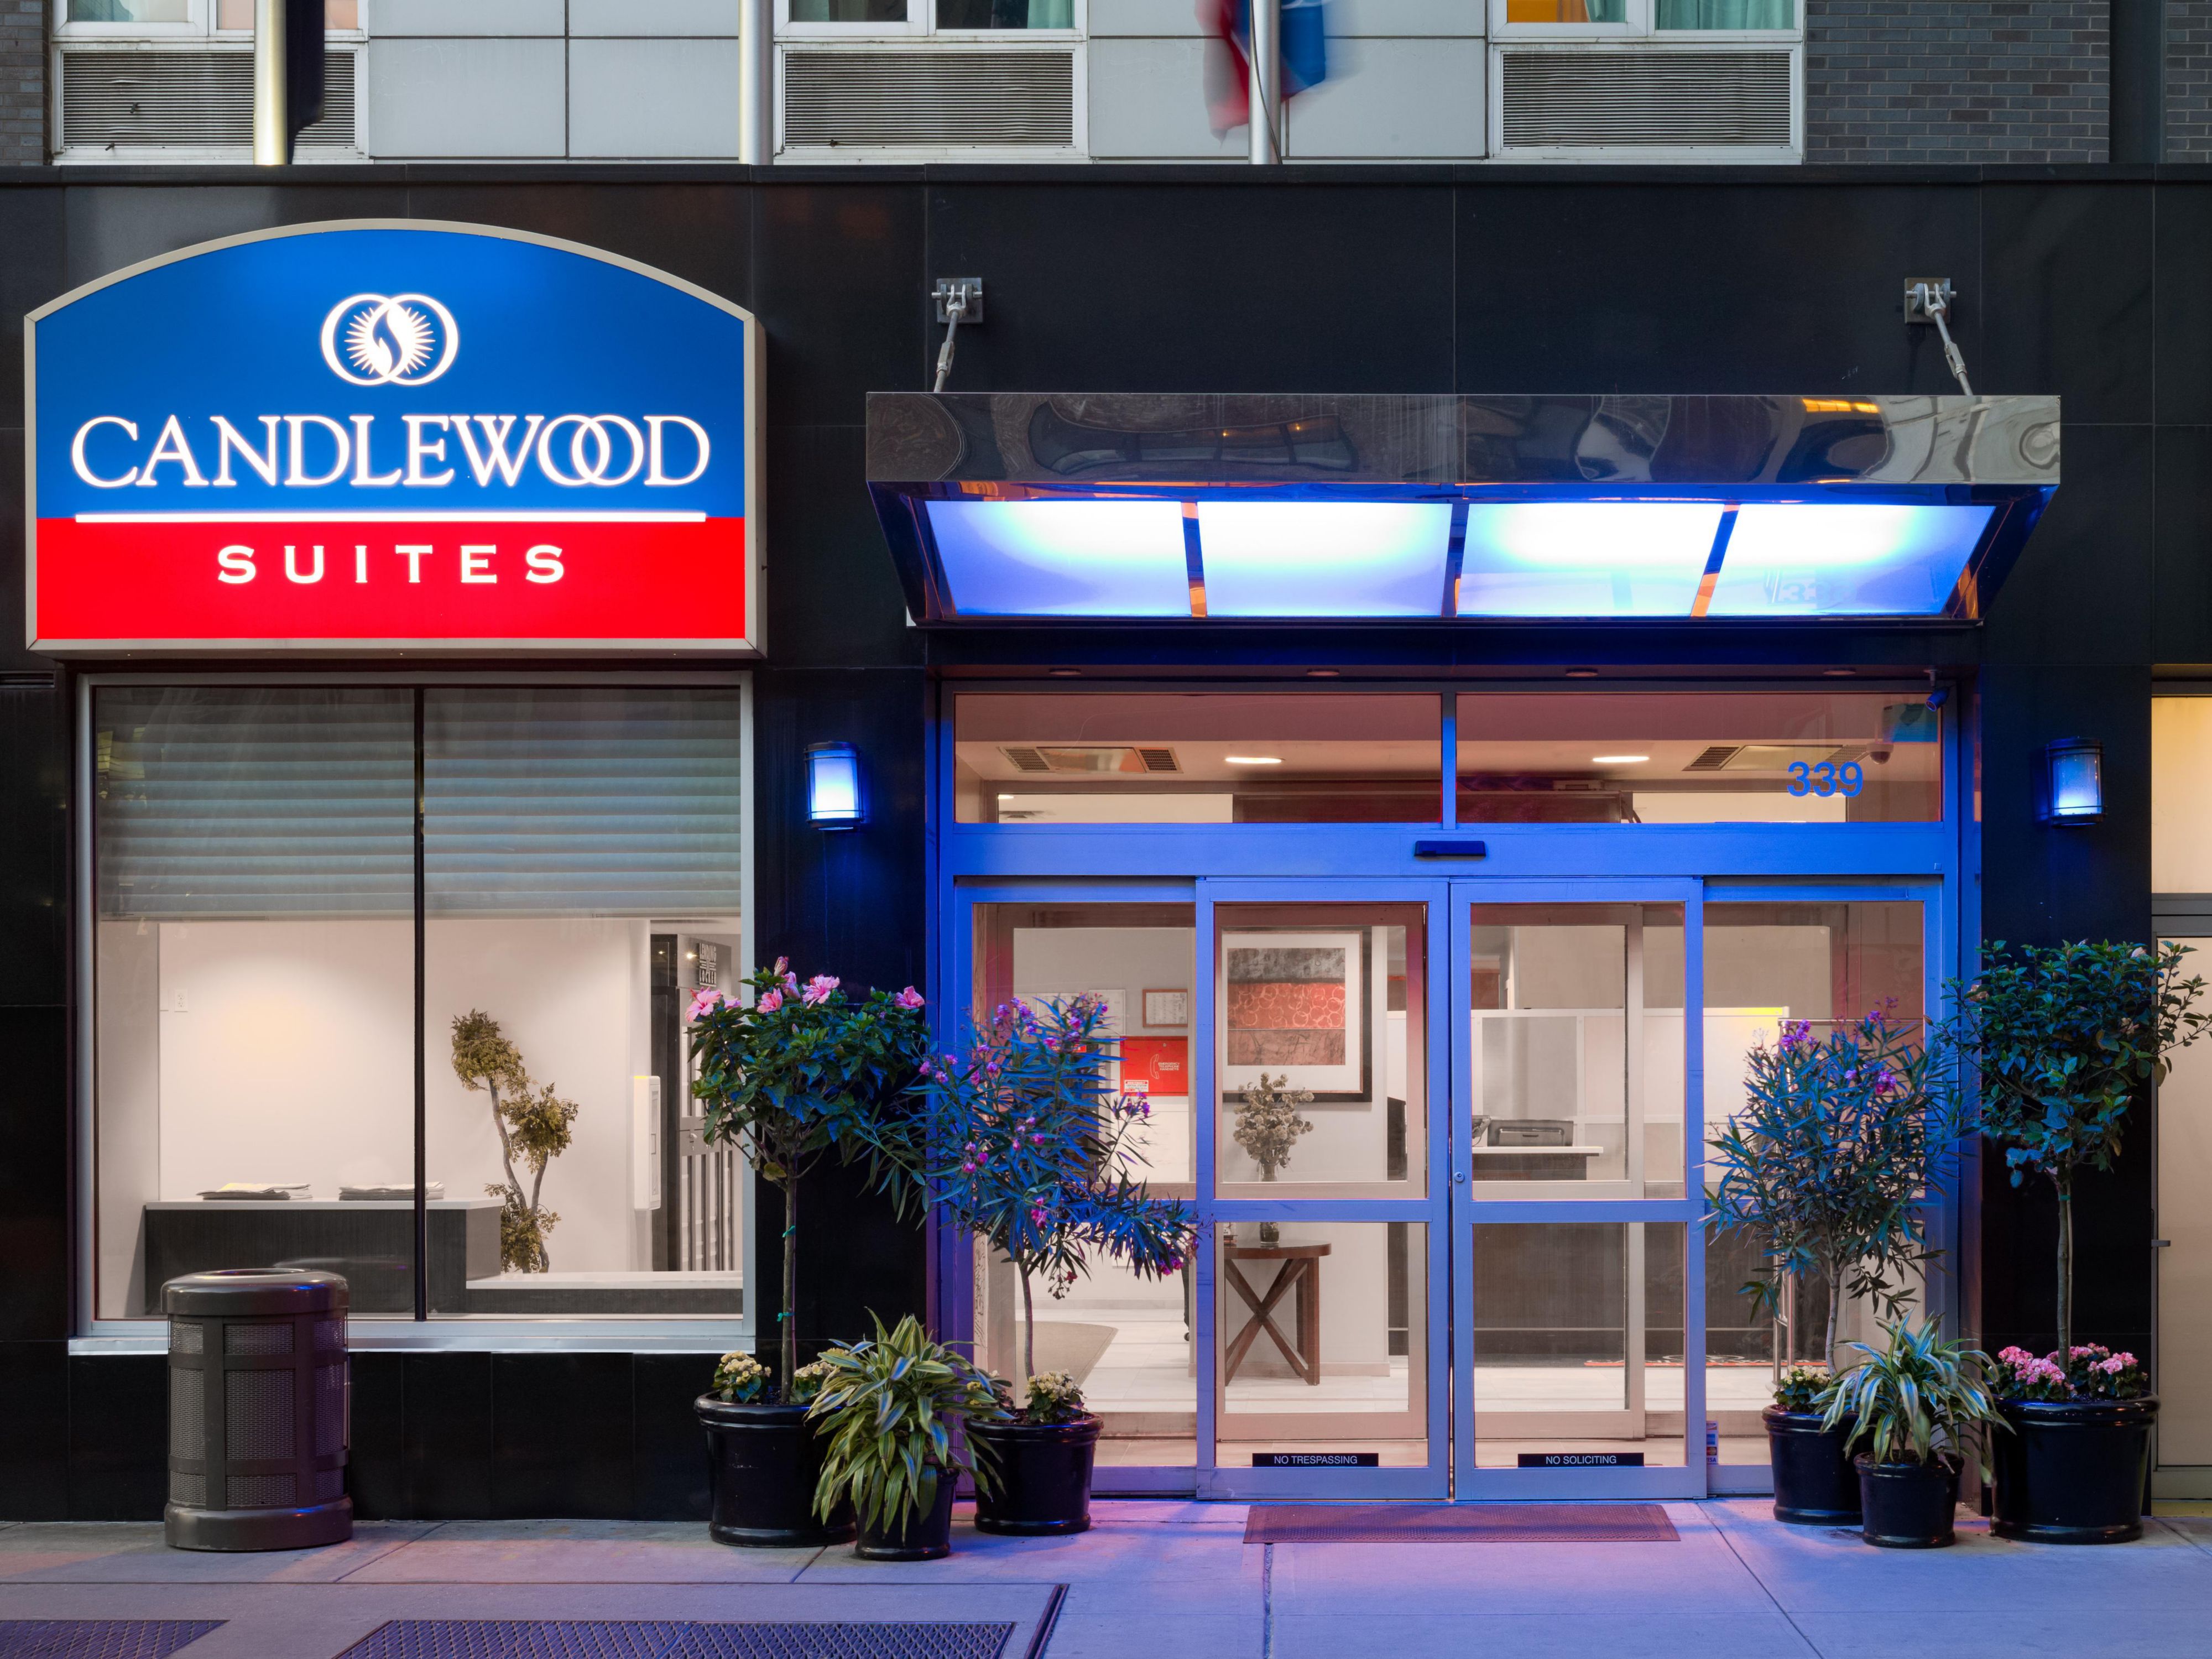 Candlewood Suites New York City Times Square Buchen Sie